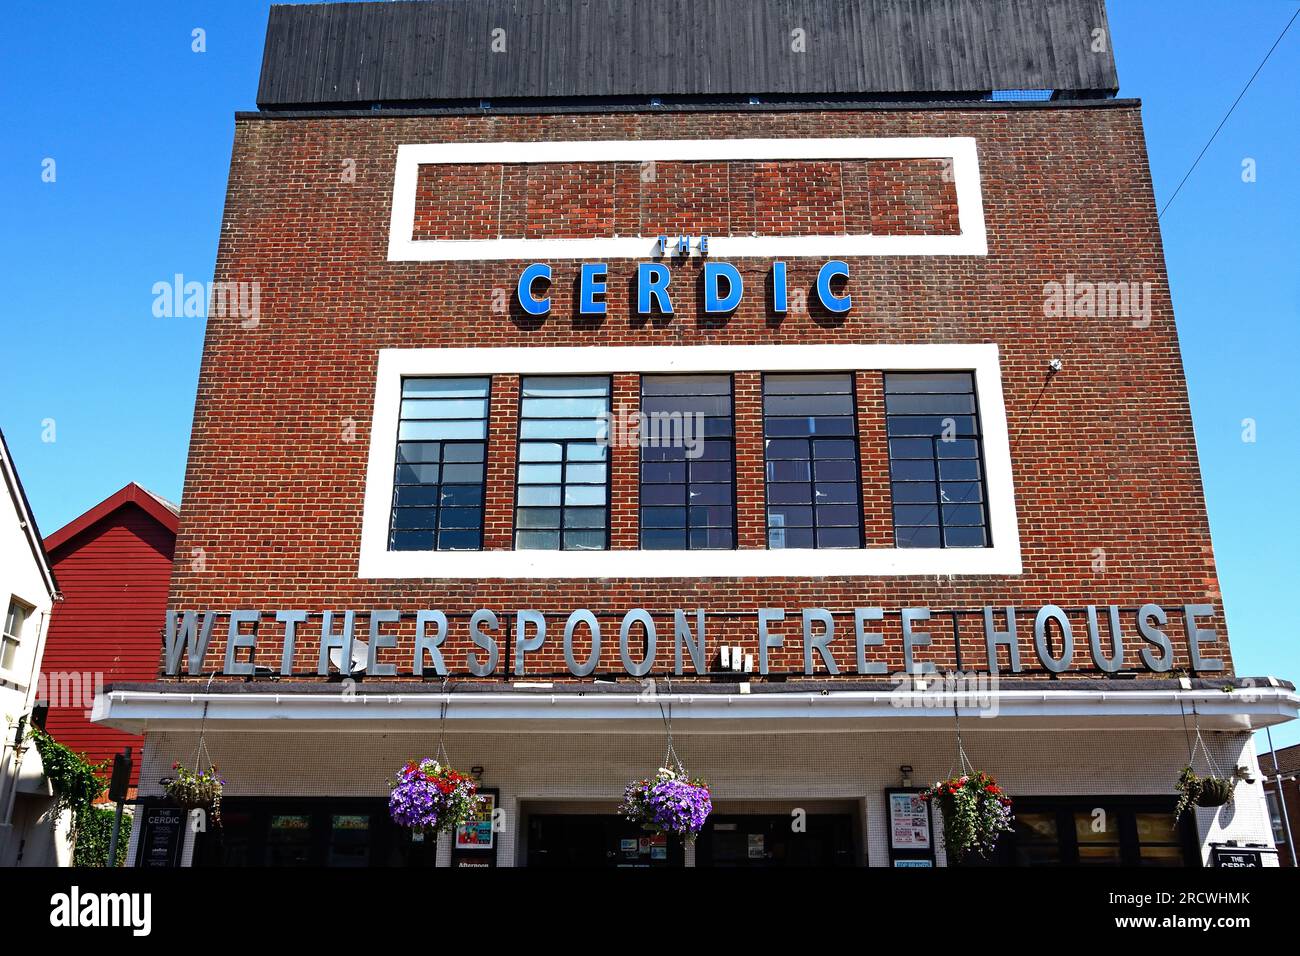 Front view of the Cerdic pub (formerly a cinema), Wetherspoon Free House, Chard, Somerset, UK, Europe. Stock Photo